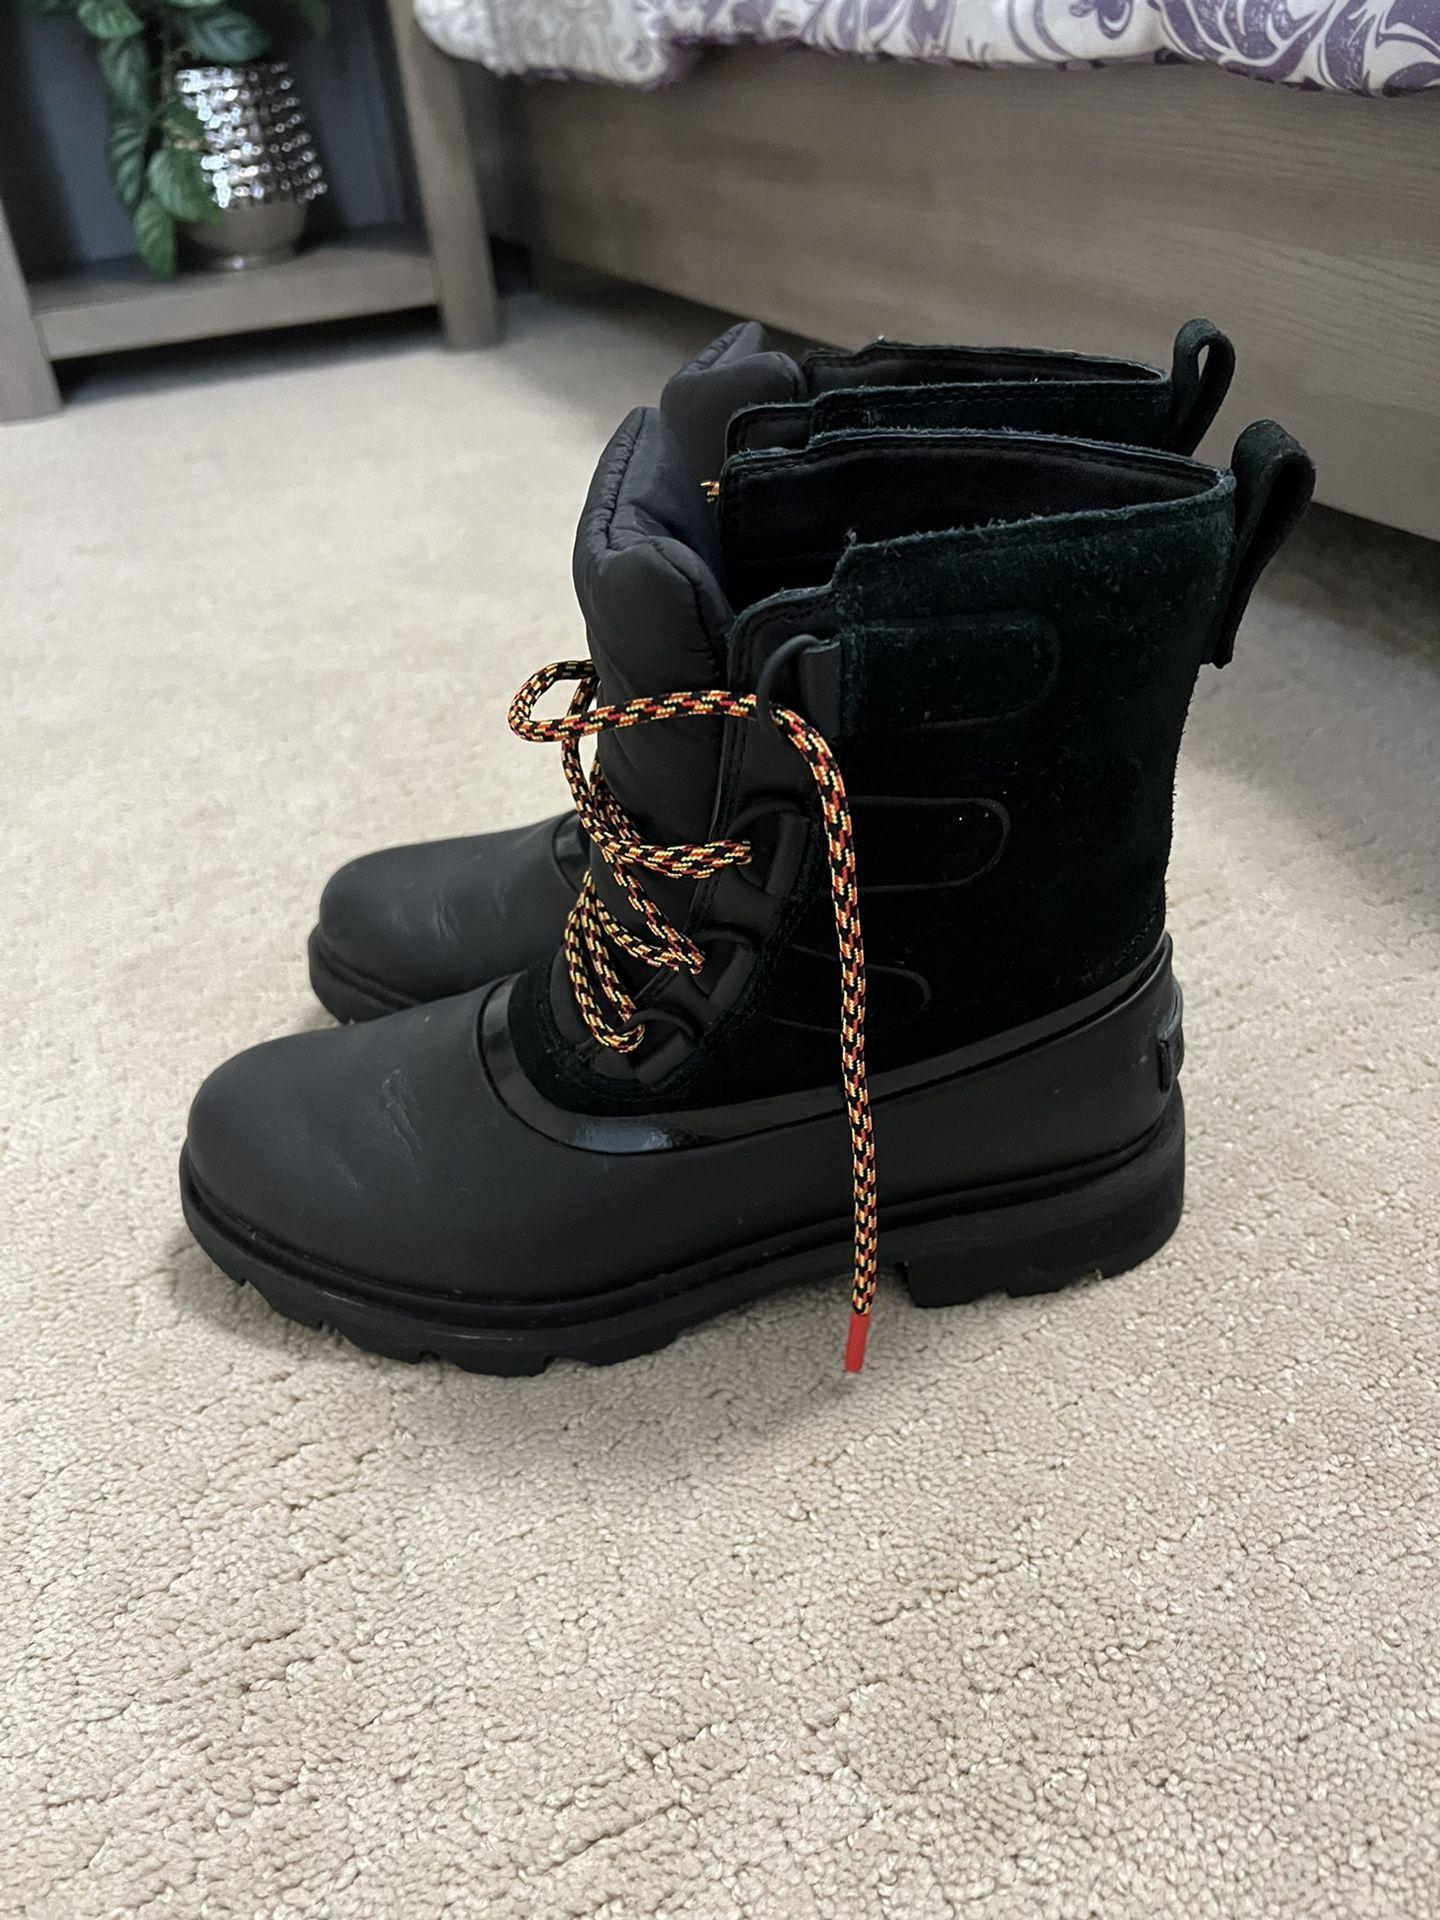 Sorel Winter/Snow Boots For Sale 